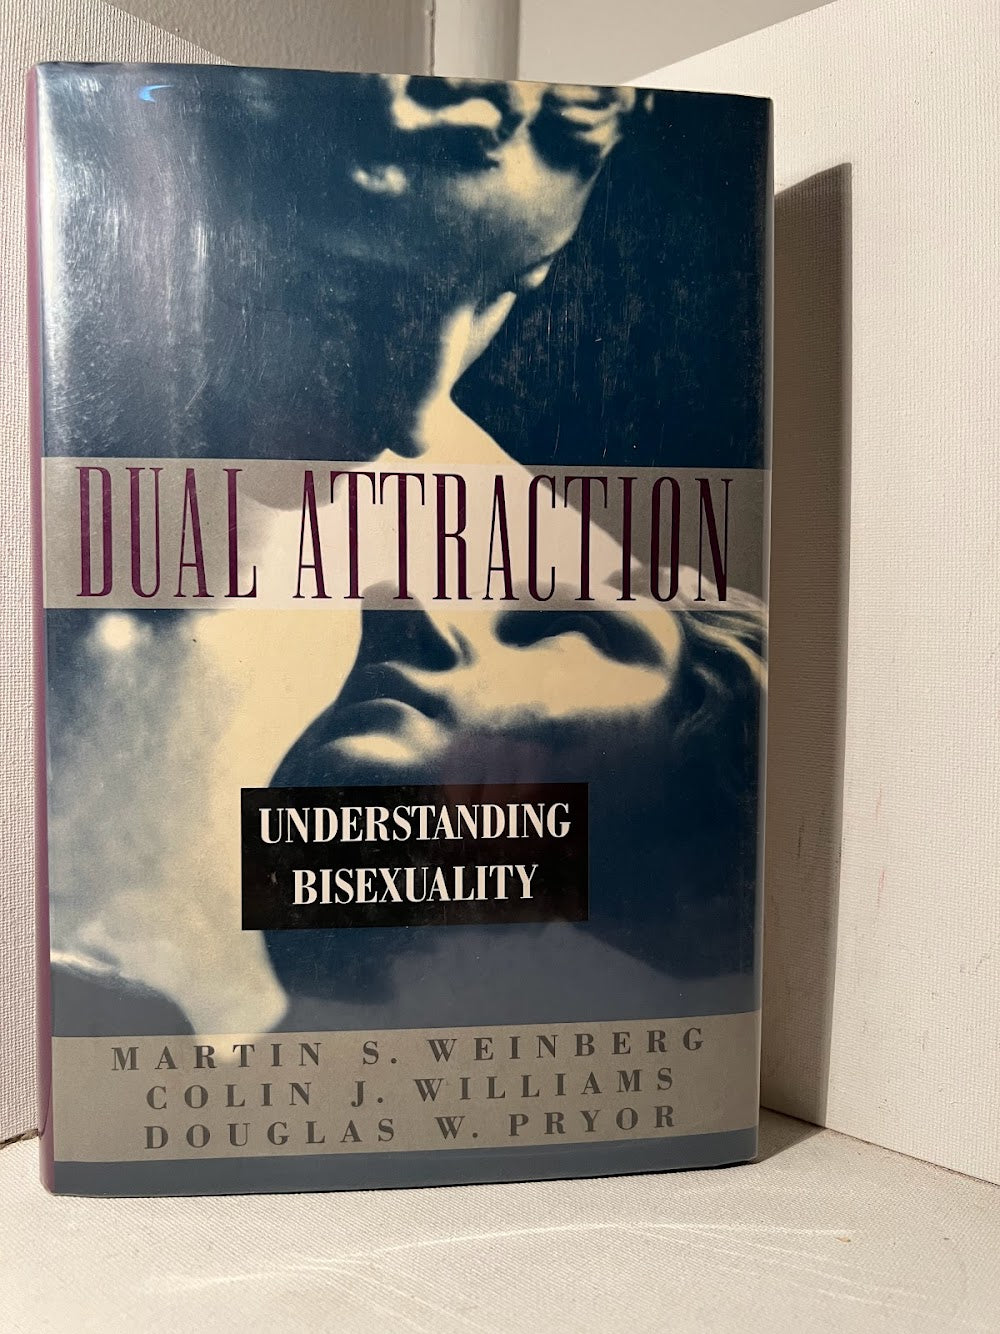 Dual Attraction: Understanding Bisexuality by Martin S. Weinberg, Colin J. Williams, Douglas W. Pryor